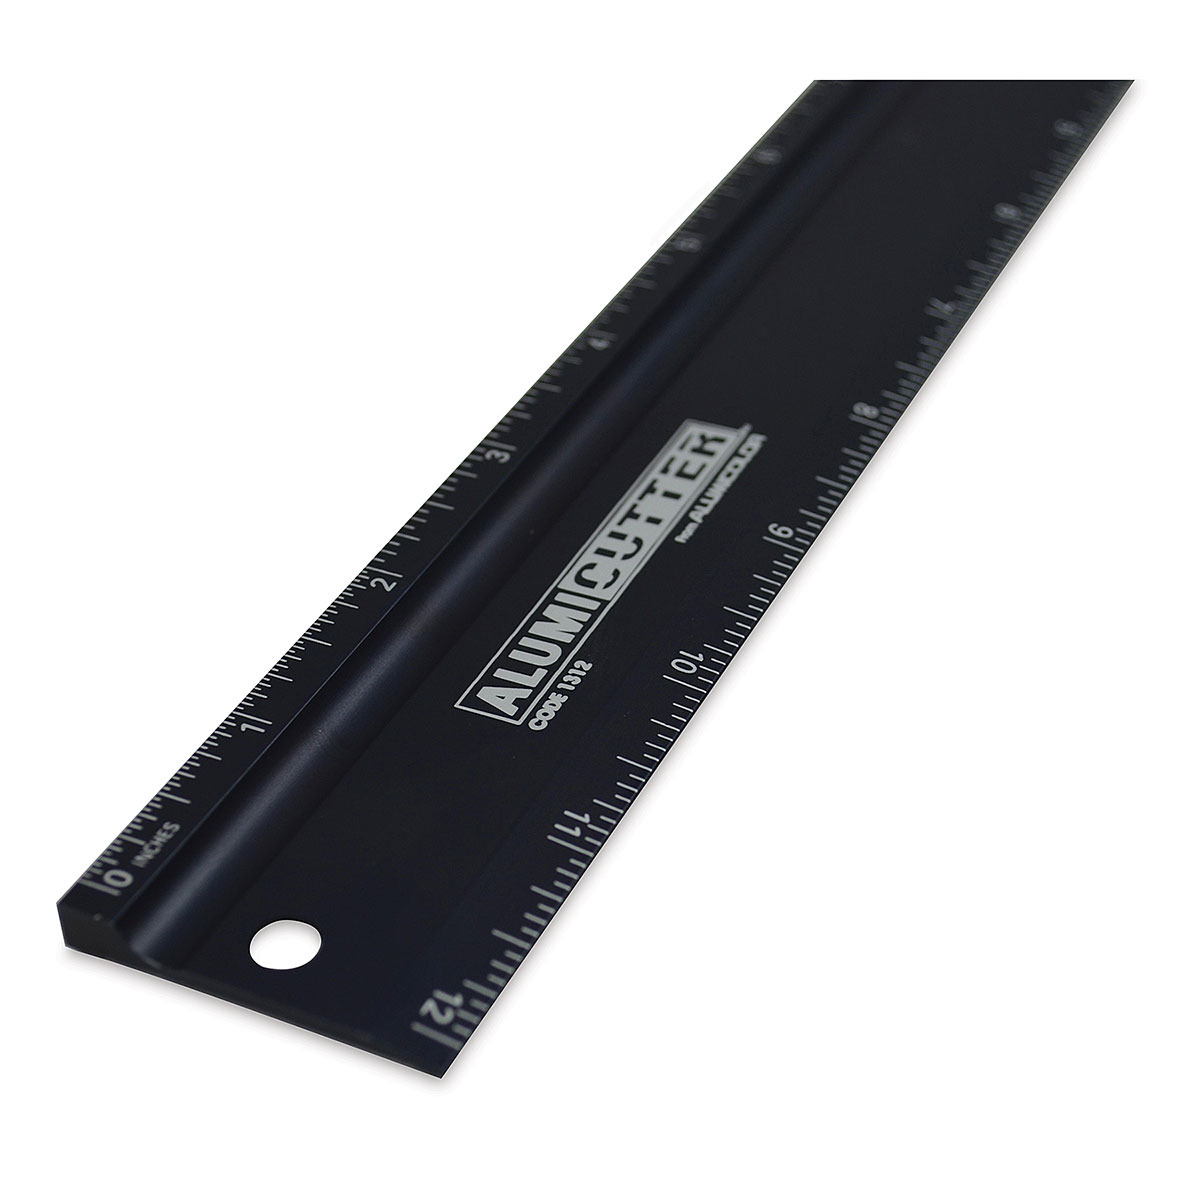 Alumicolor AlumiCrafter Straight Edge Metal Ruler with Unique Deckle Edge, Silver, 18 inch